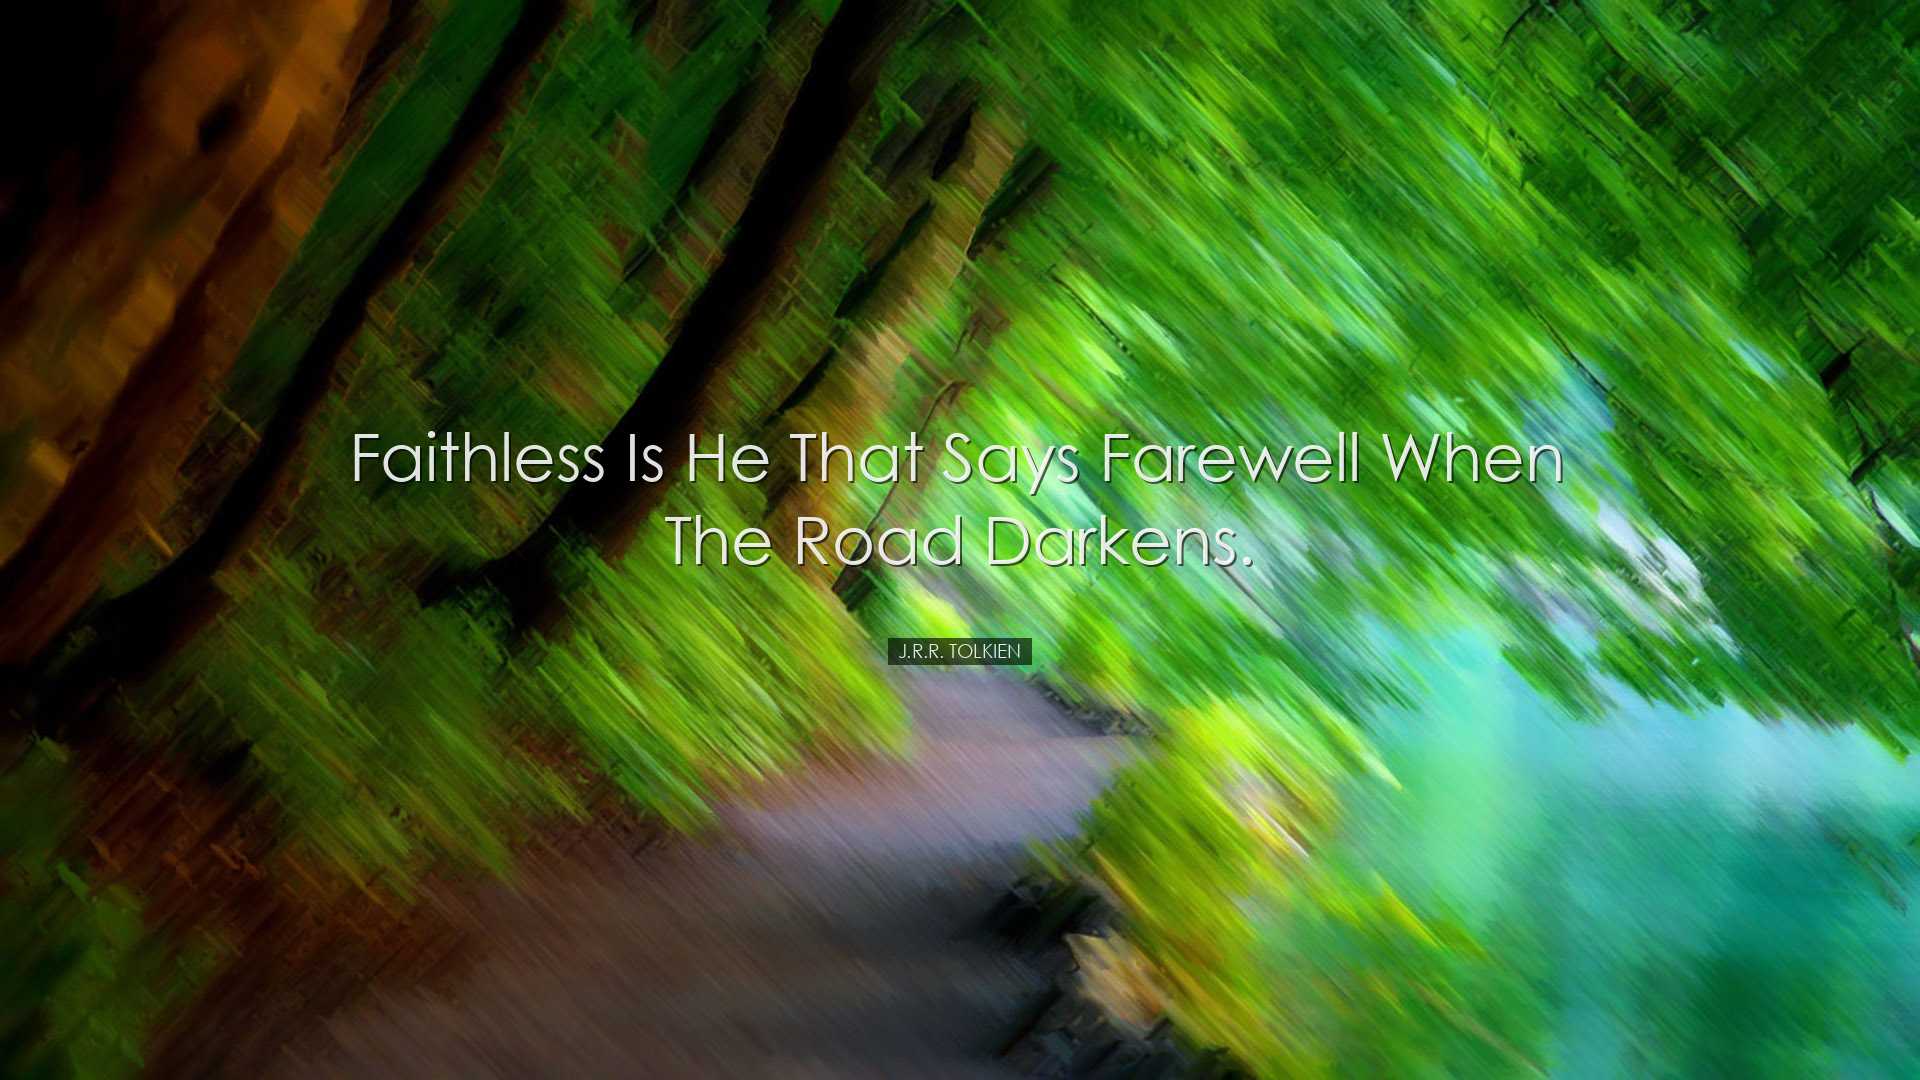 Faithless is he that says farewell when the road darkens. - J.R.R.